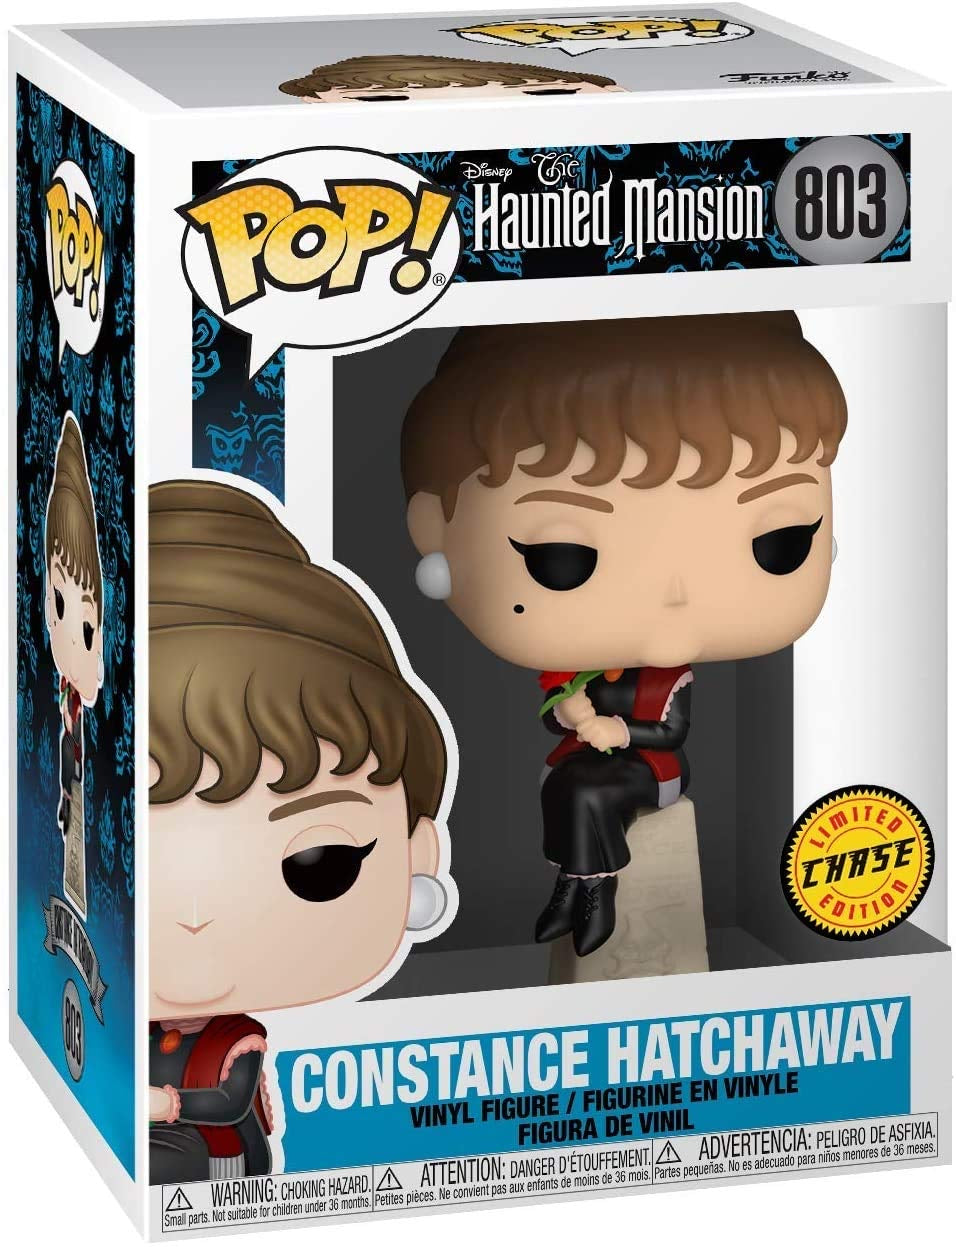 Funko Pop! Disney The Haunted Mansion Constance Hatchaway 803 CHASE + Free Protector